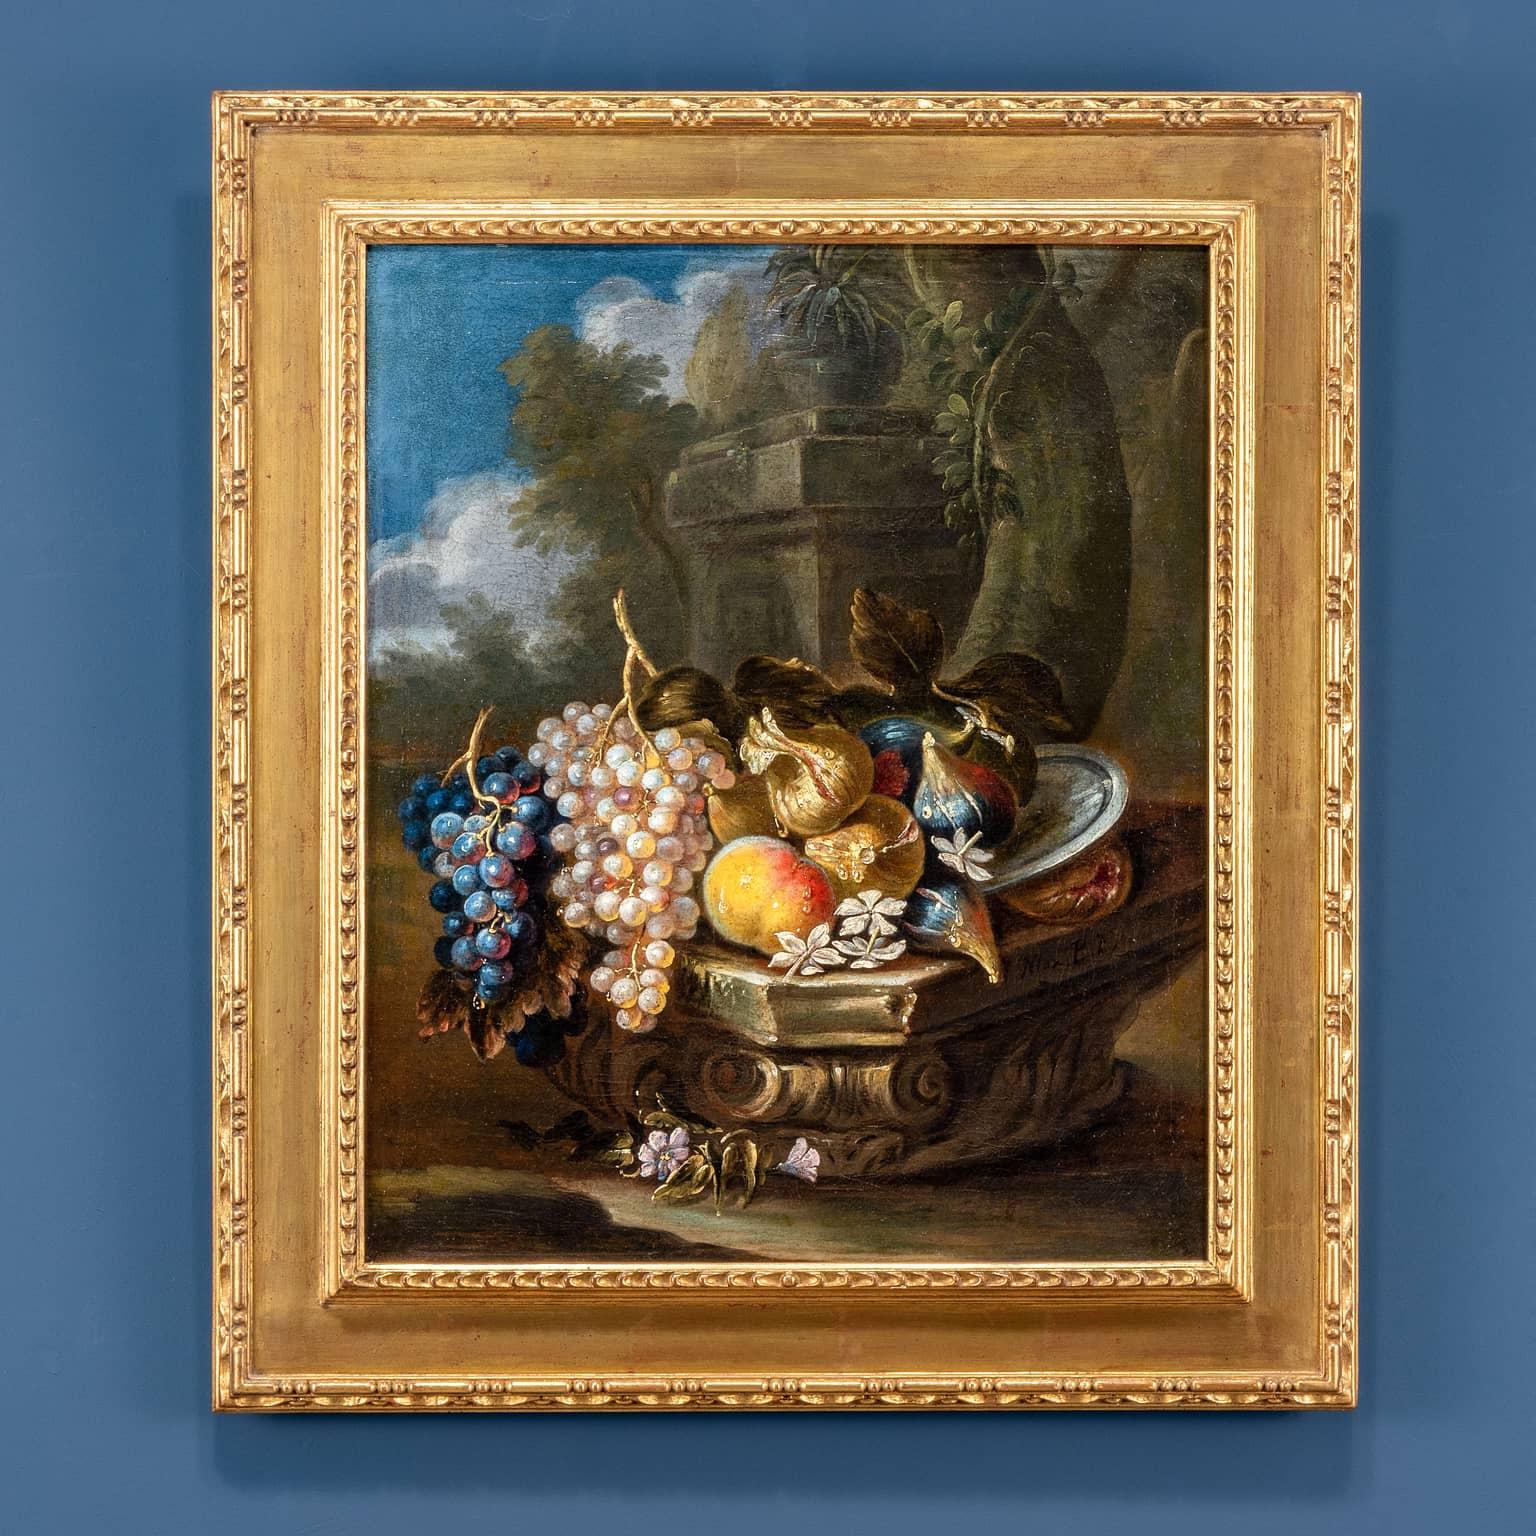 Grapes, figs, pomegranate and peaches on a pillar – Maximilian Pfeiler, first quarter of the 18th century